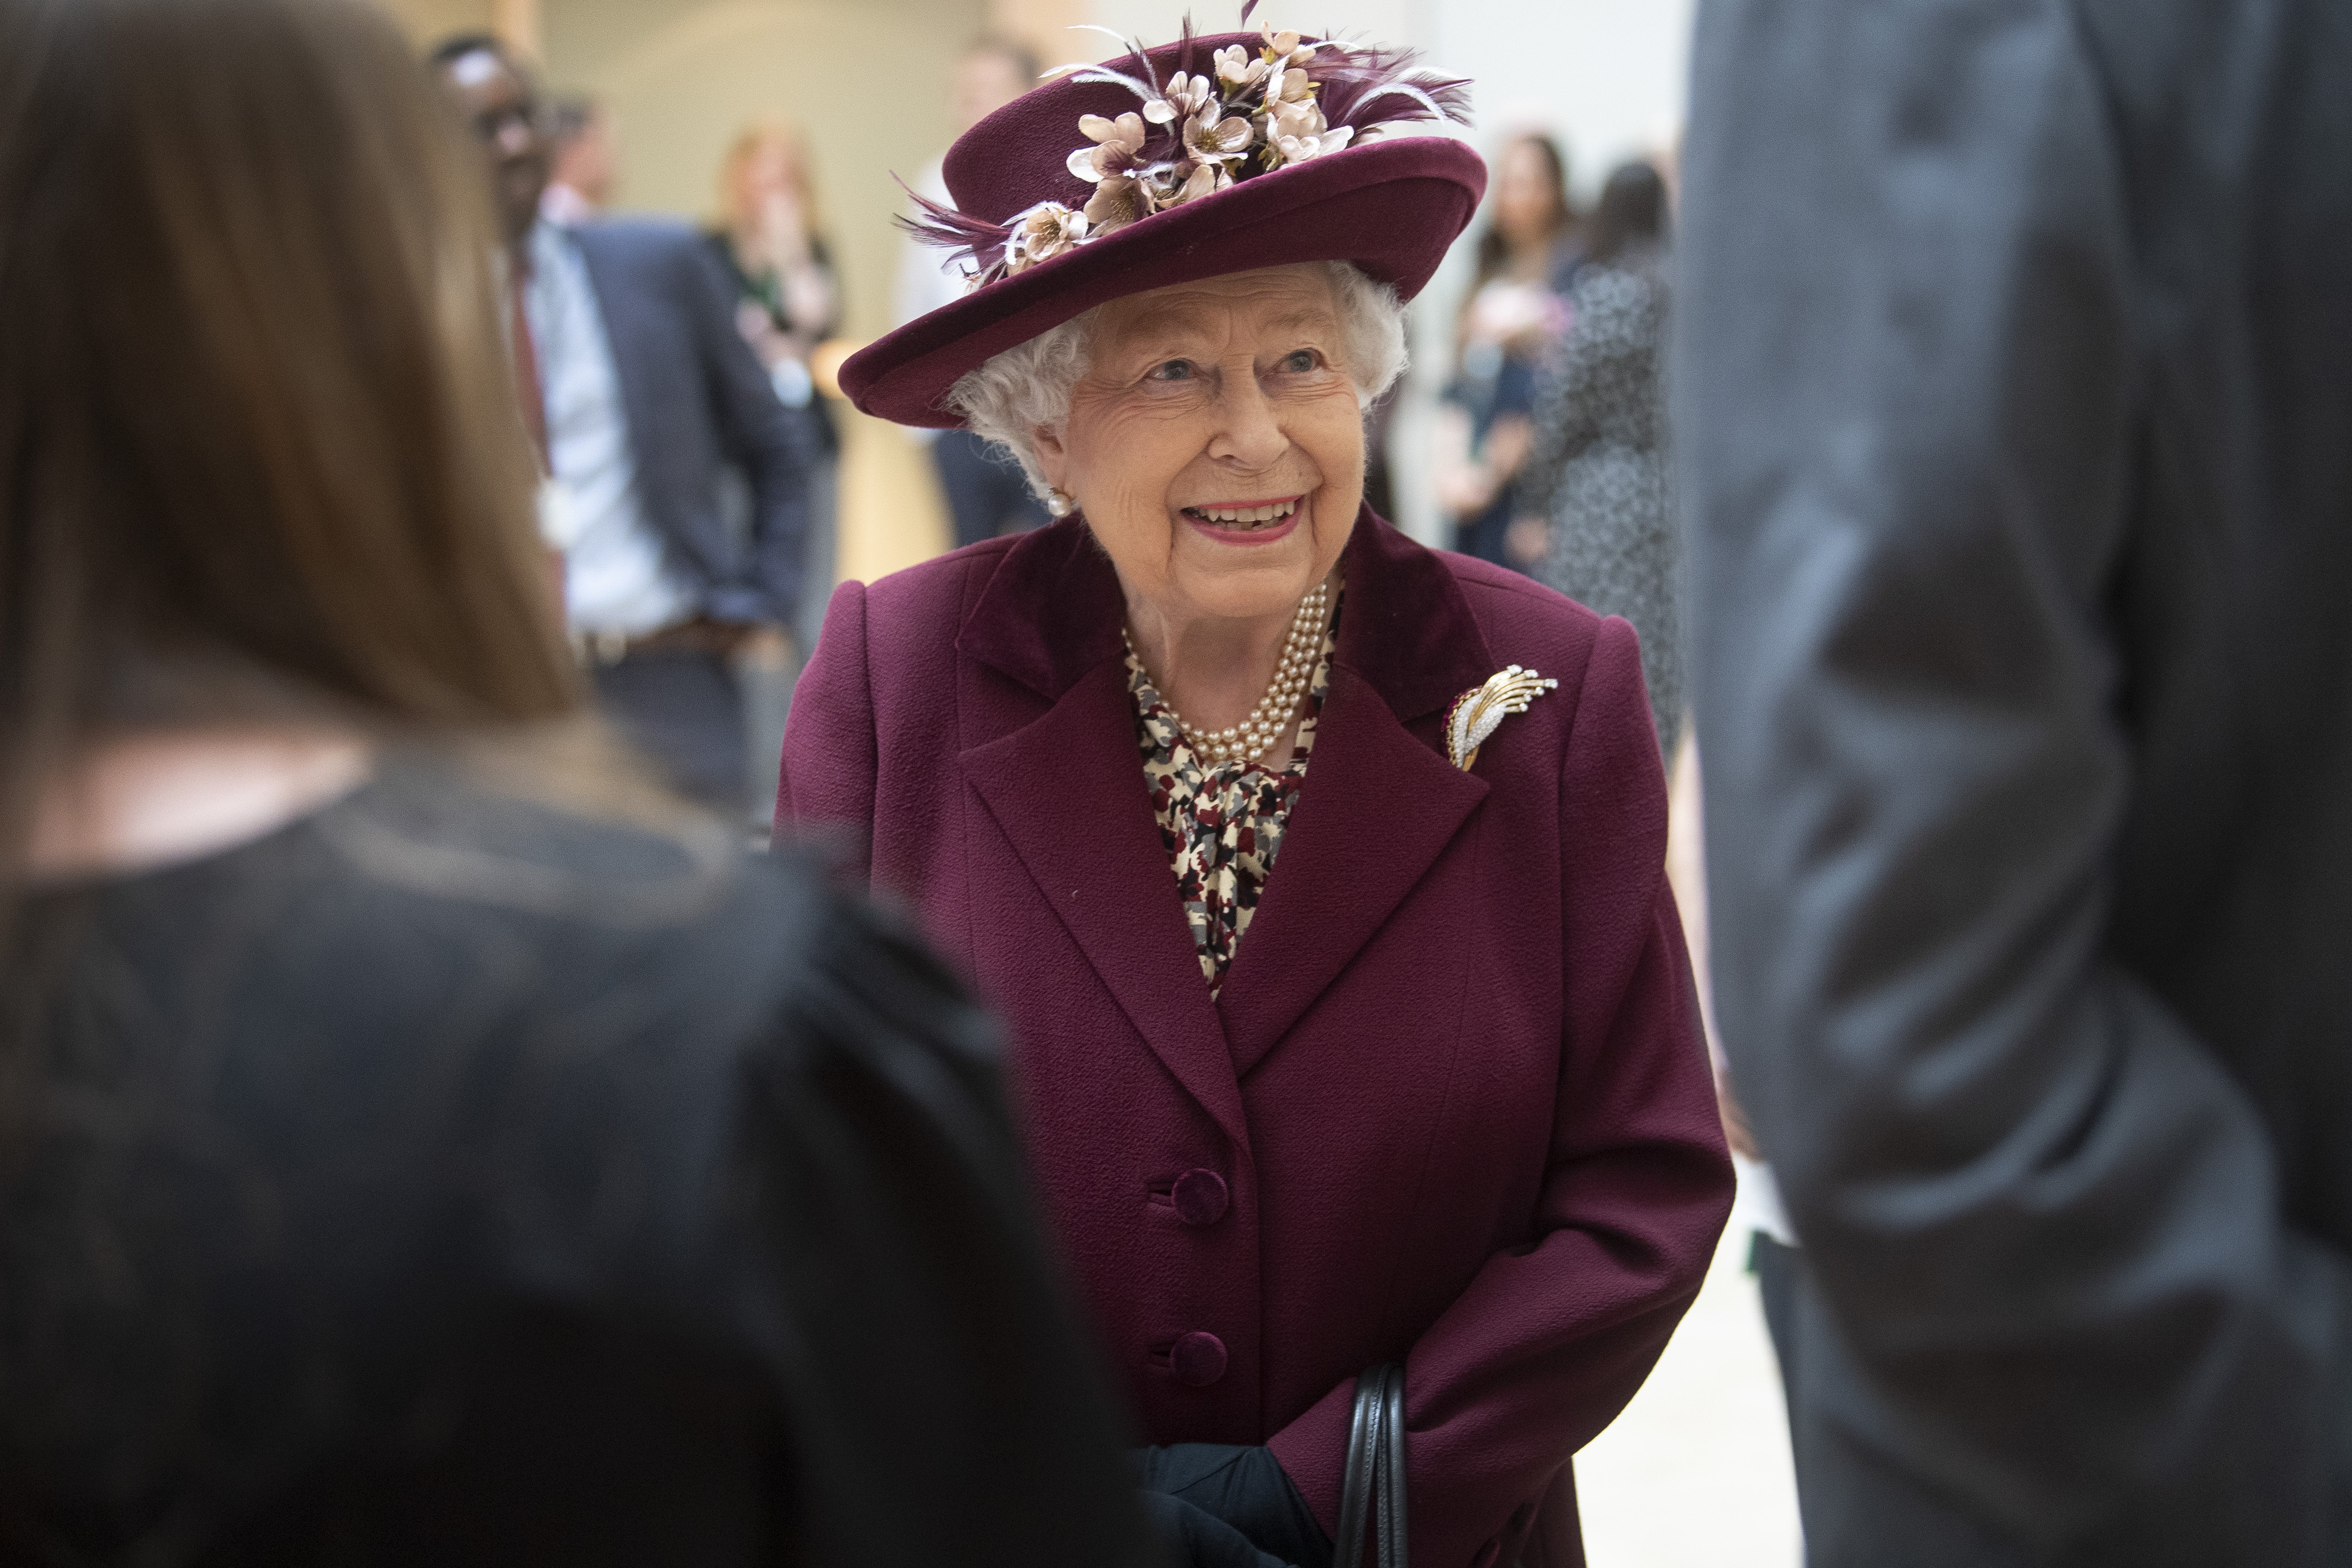 Queen Elizabeth II talks with MI5 officers during a visit to the headquarters of MI5 at Thames House on February 25, 2020 in London, England | Photo: Getty Images